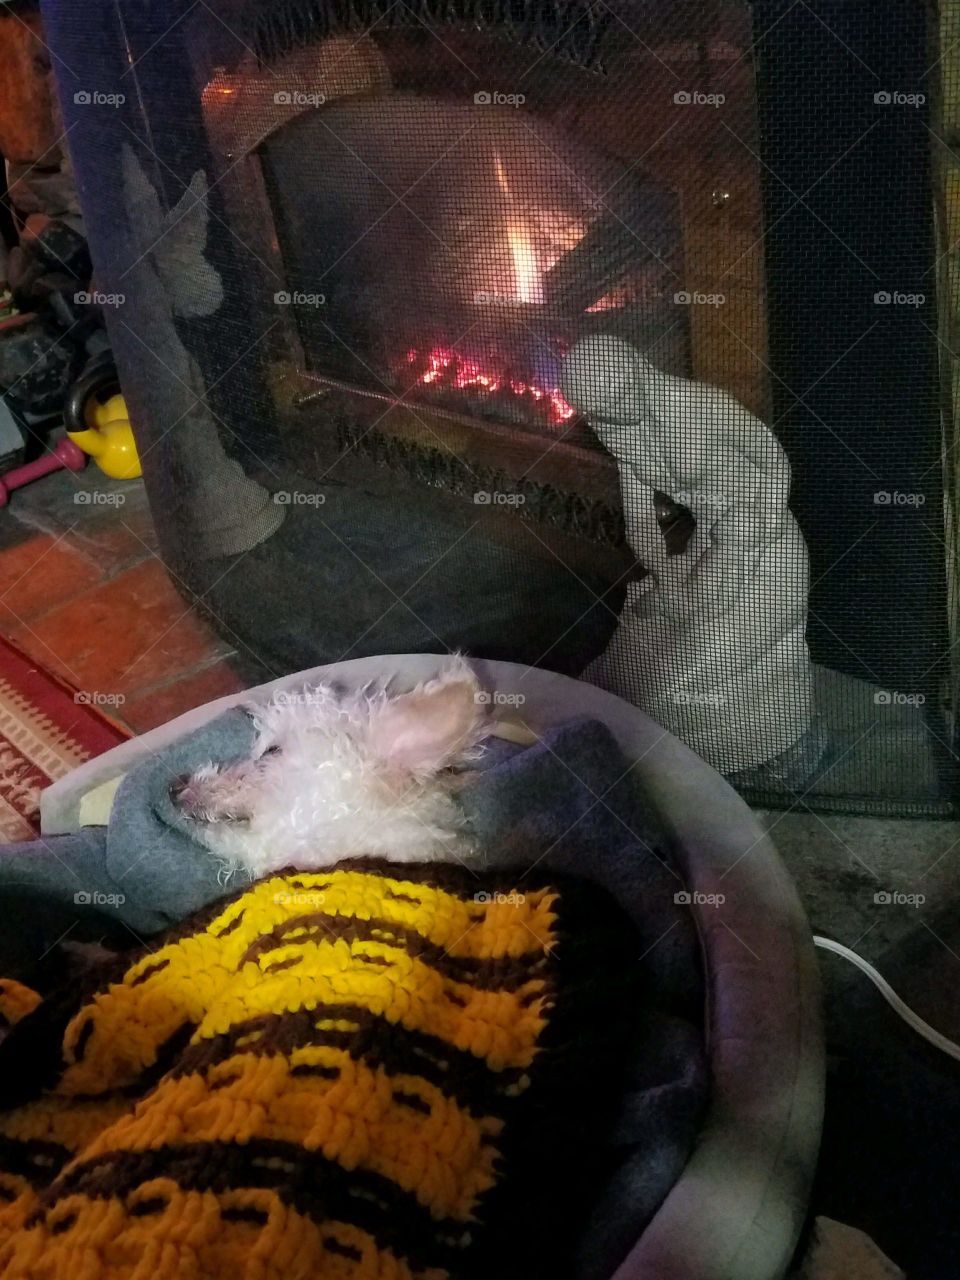 Little toy poodle kept warm covered in dog bed in front of burning fireplace.